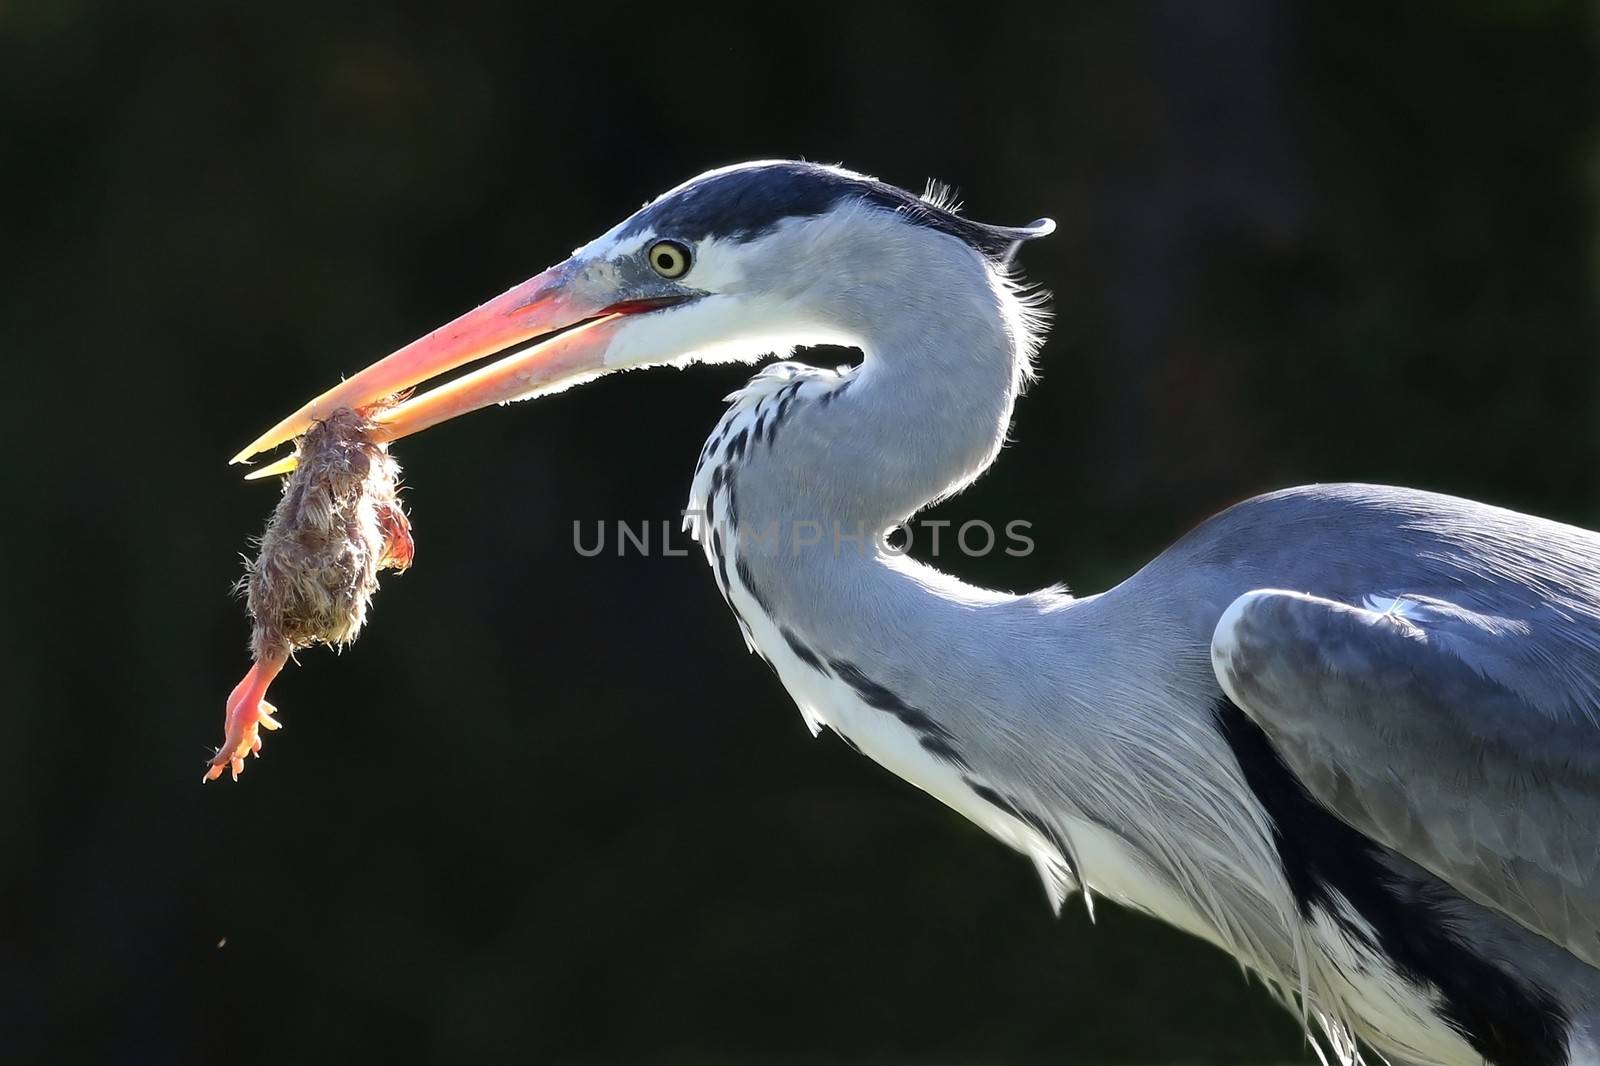 Heron bird with a chick which it has caught to eat in it's beak